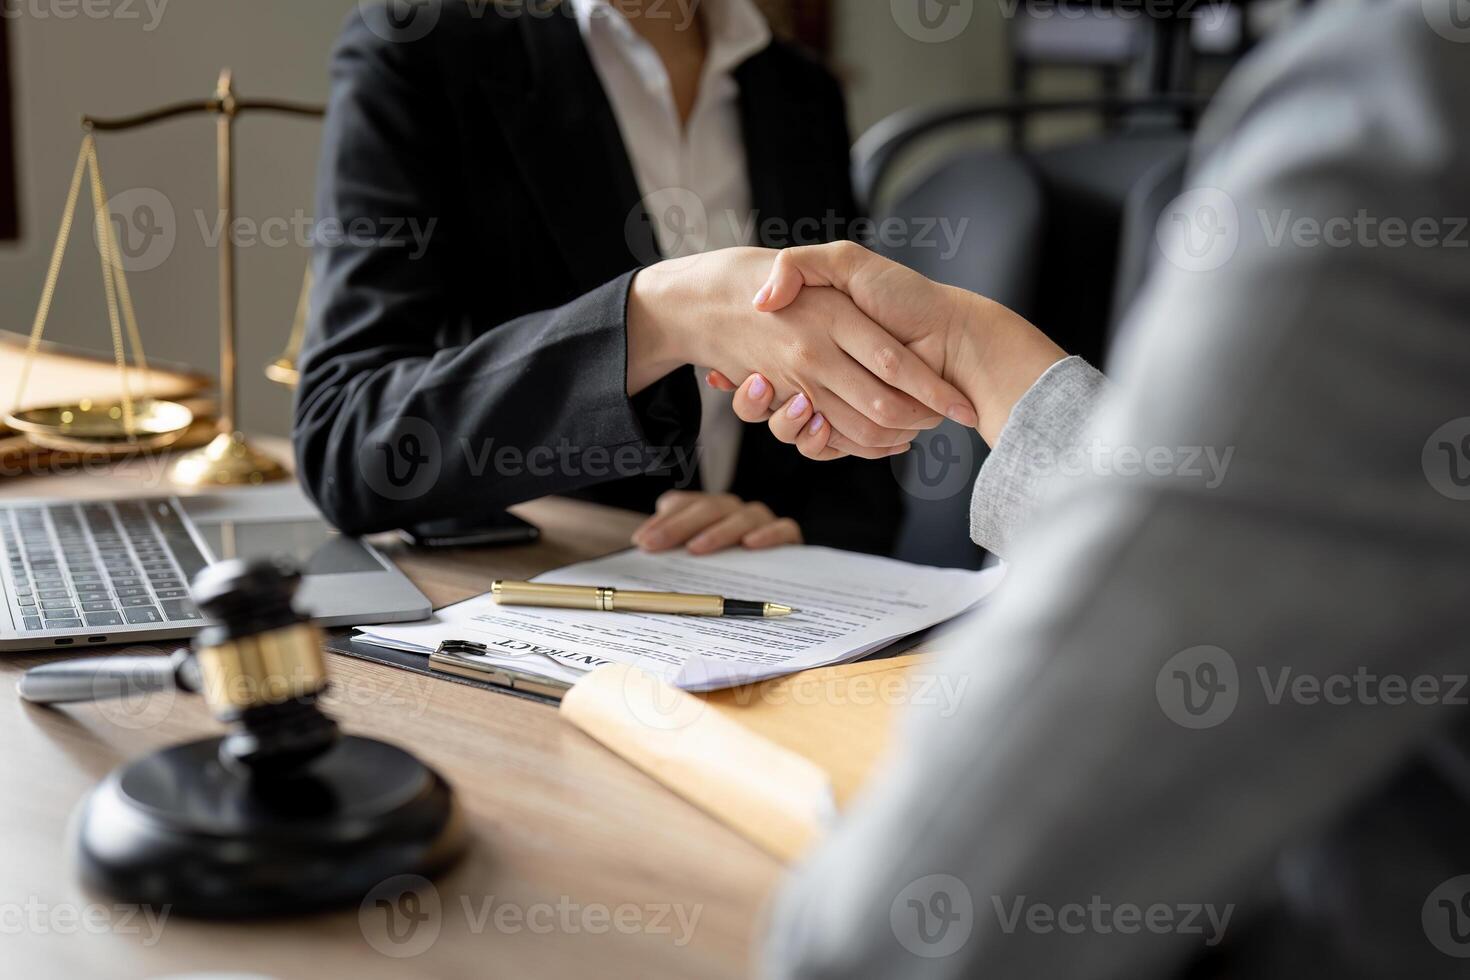 Gavel Justice hammer on wooden table with judge and client shaking hands after adviced in background at courtroom, lawyer service concept. photo